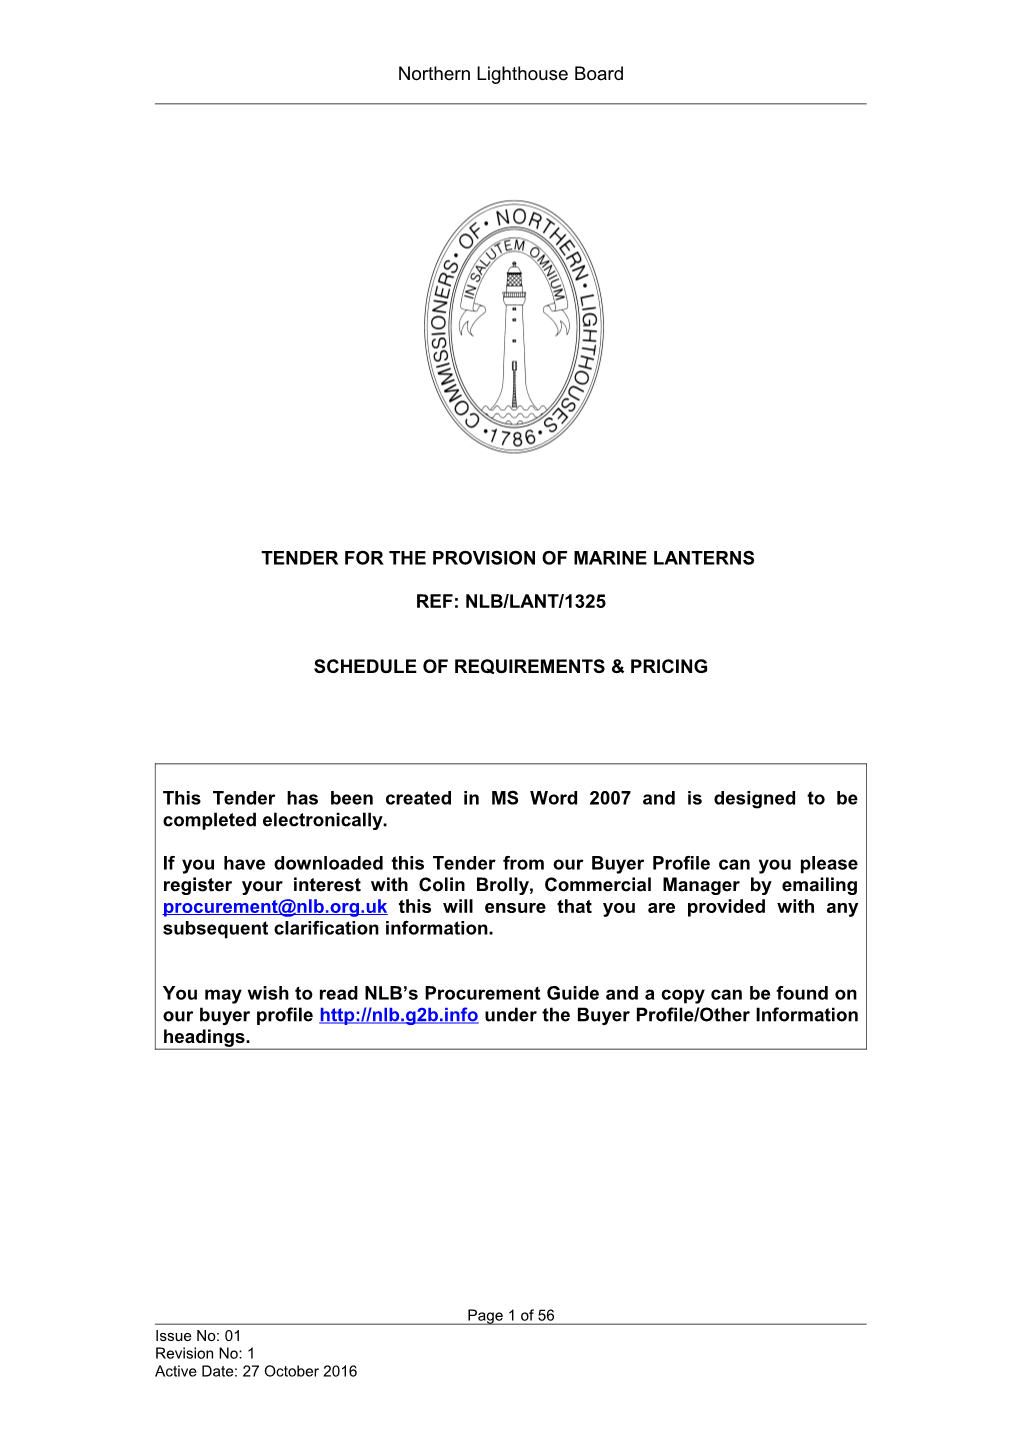 Tender for the Provision of Marine Lanterns